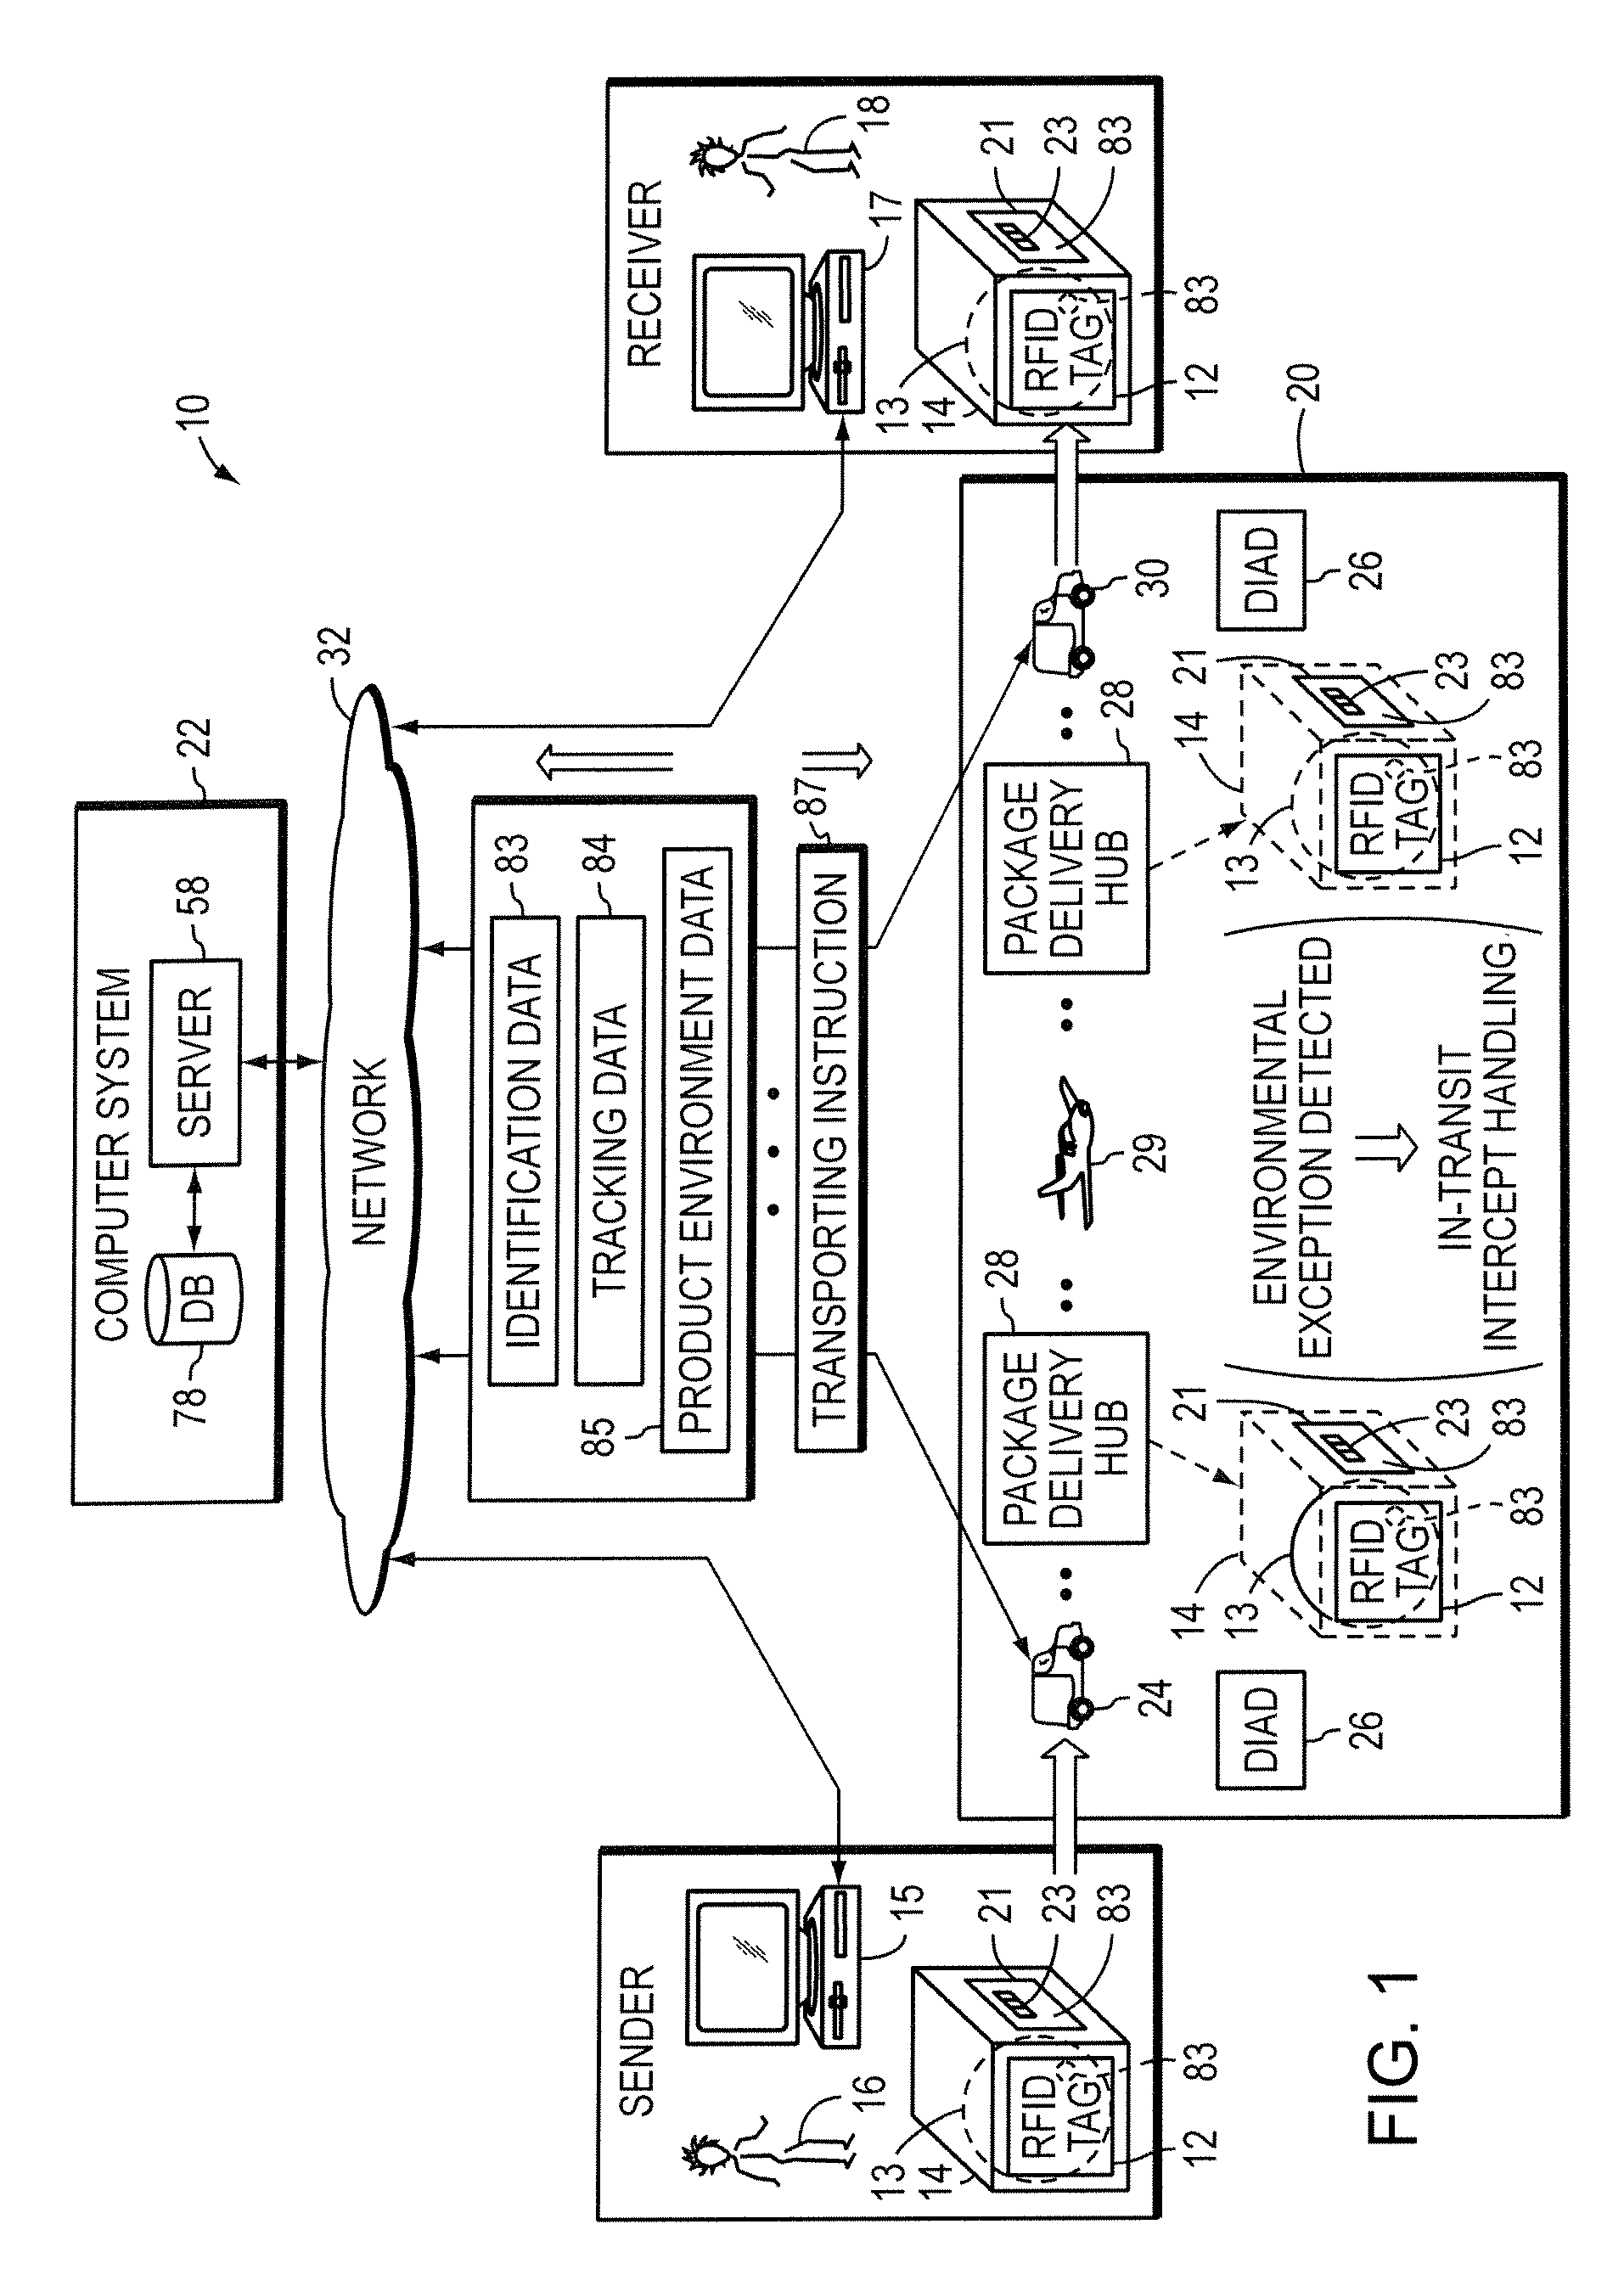 Systems and methods for transporting a product using an environmental sensor